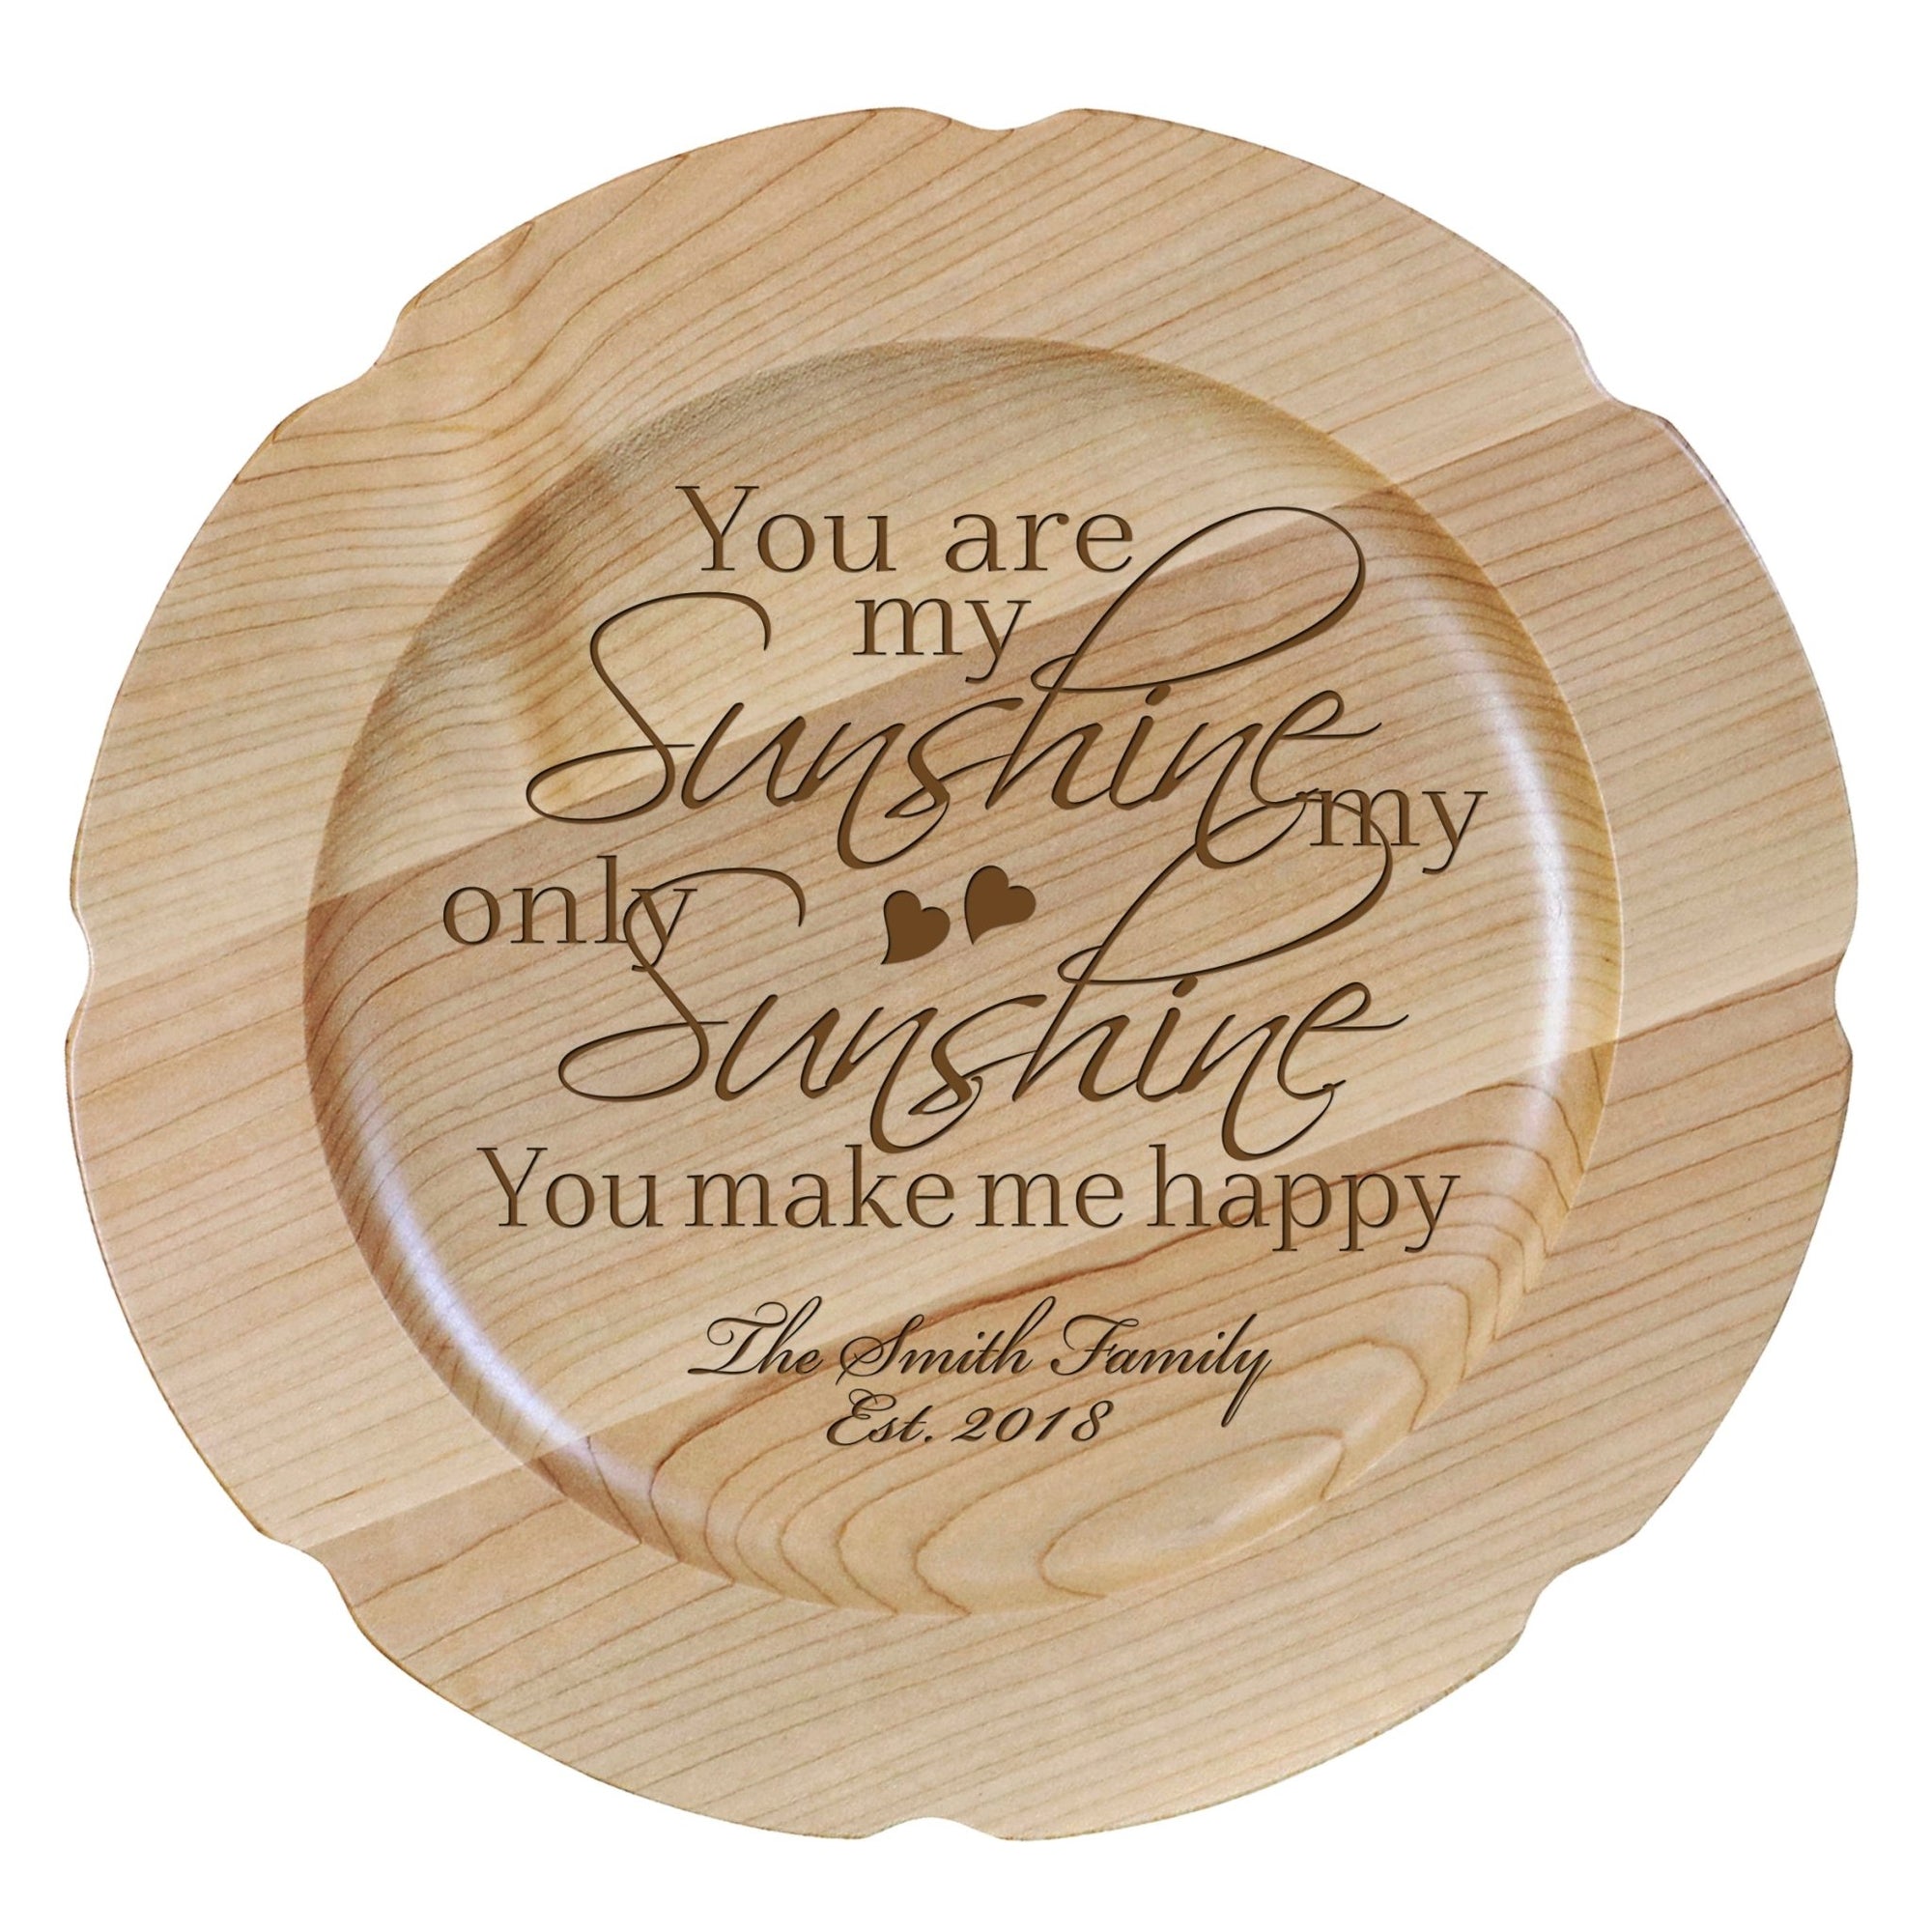 Personalized Inspirational Plates With Quotes - My Sunshine - LifeSong Milestones